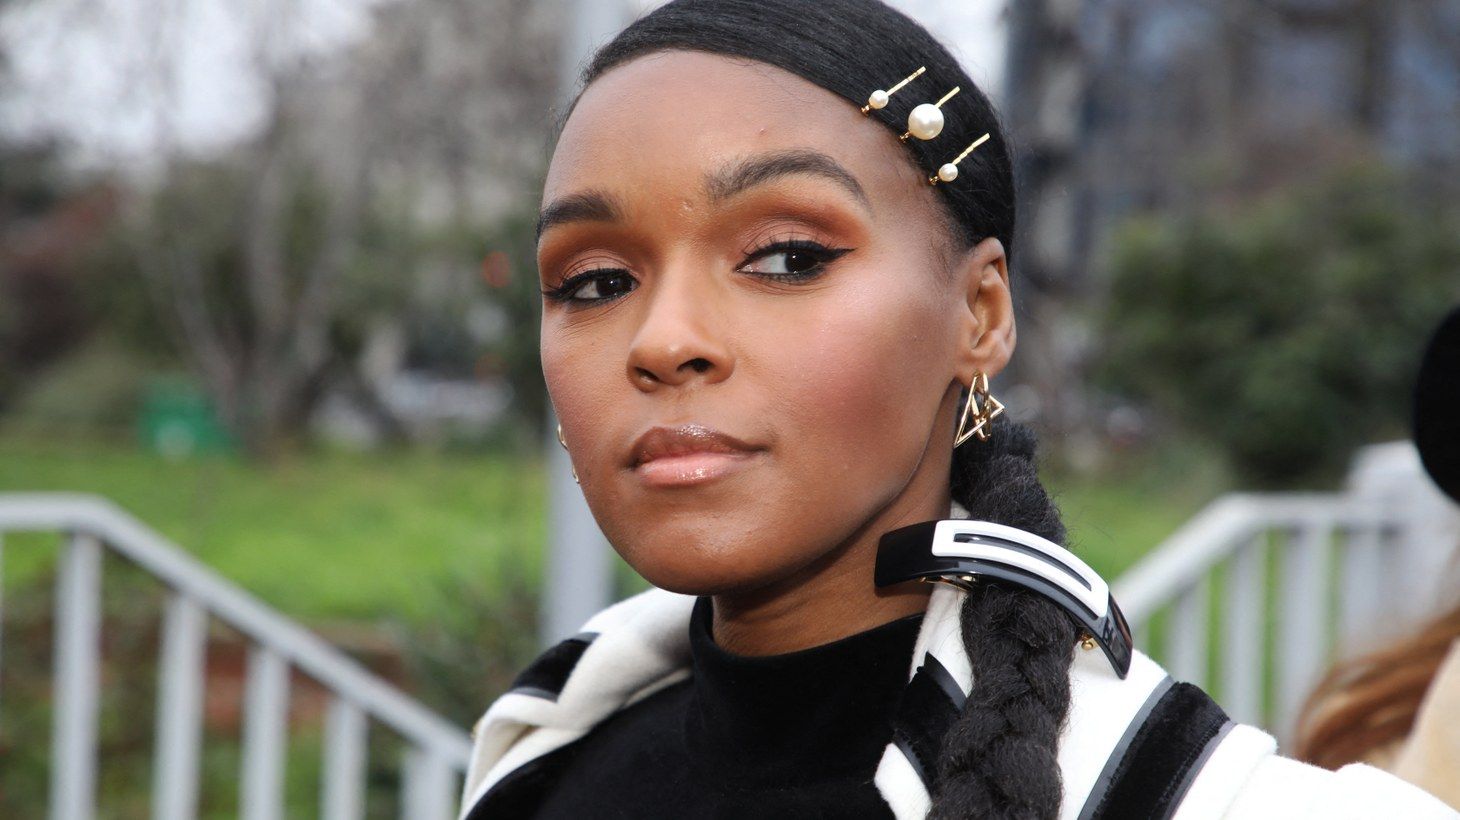 Janelle Monáe: 'Not only are we fighting COVID- we're fighting